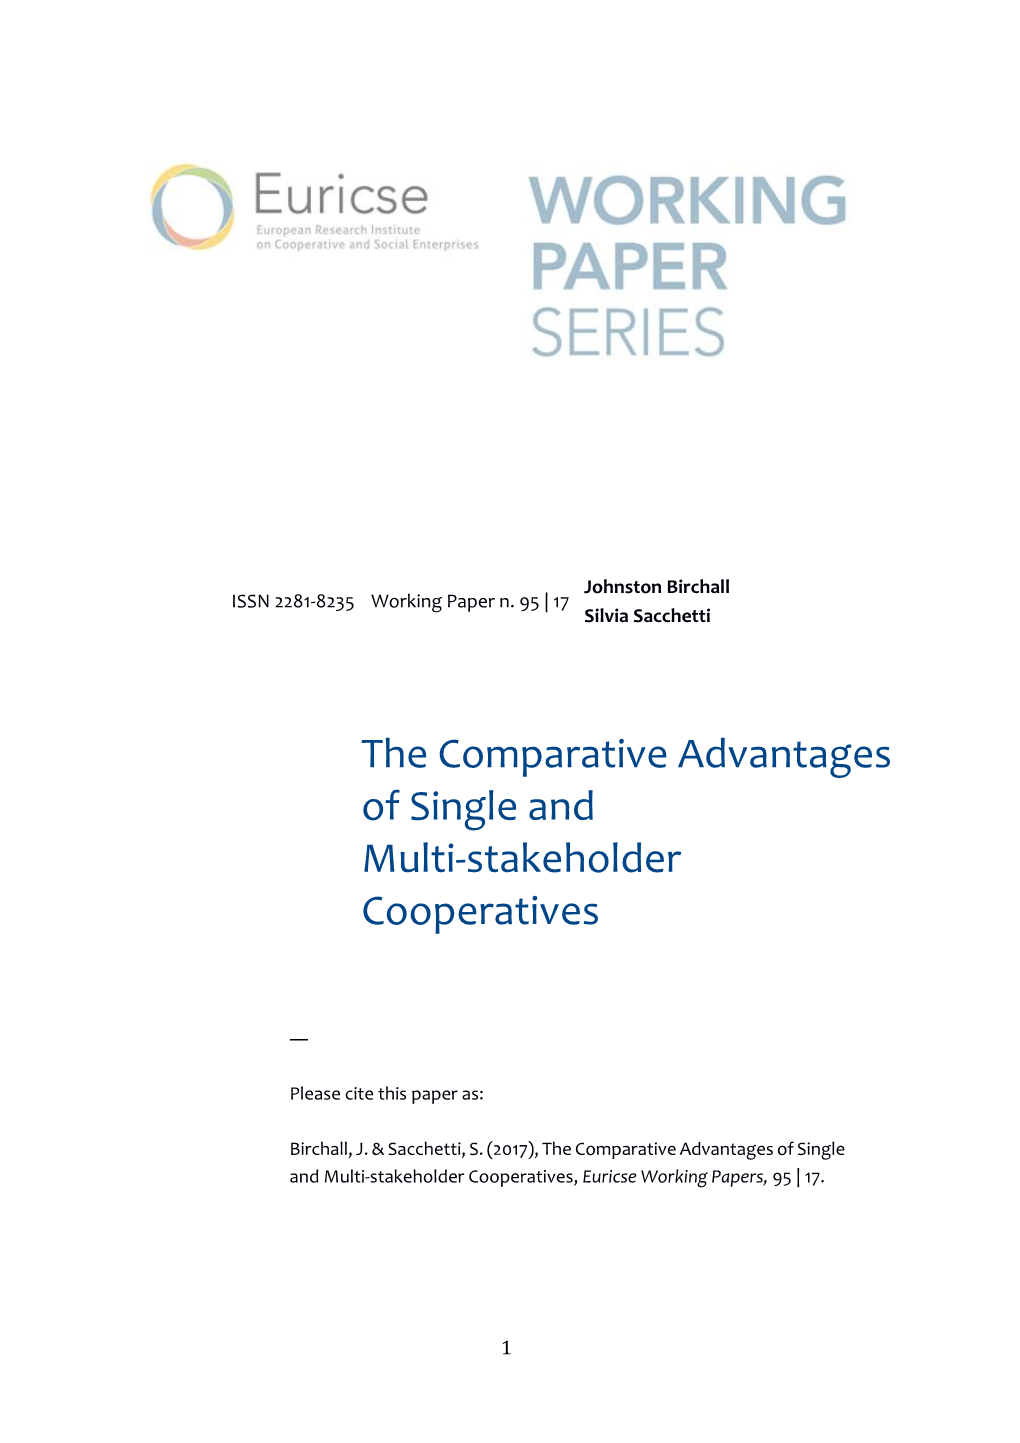 The Comparative Advantages of Single and Multi-Stakeholder Cooperatives, Euricse Working Papers, 95 | 17